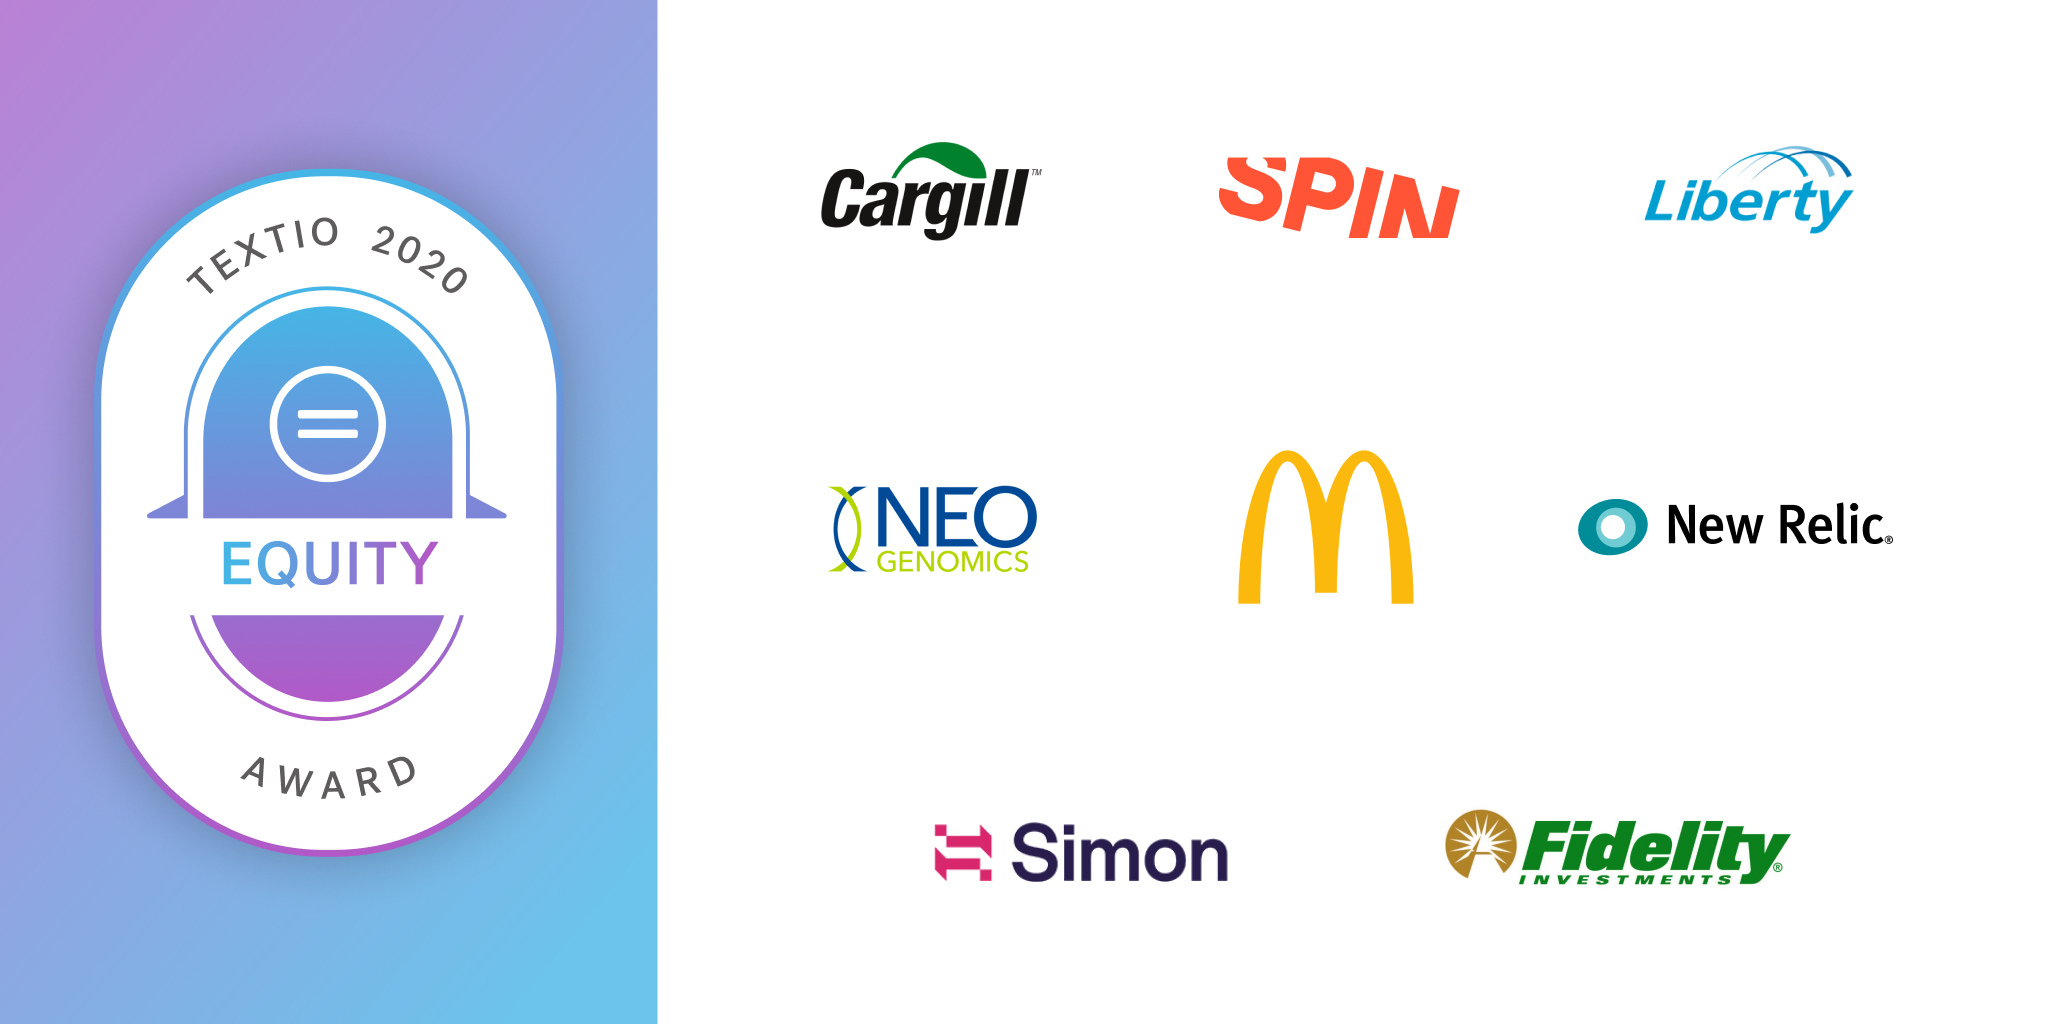 Textio Equity Award badge with company logos of recipients including McDonald's, Fidelity Investments, New Relic, and more